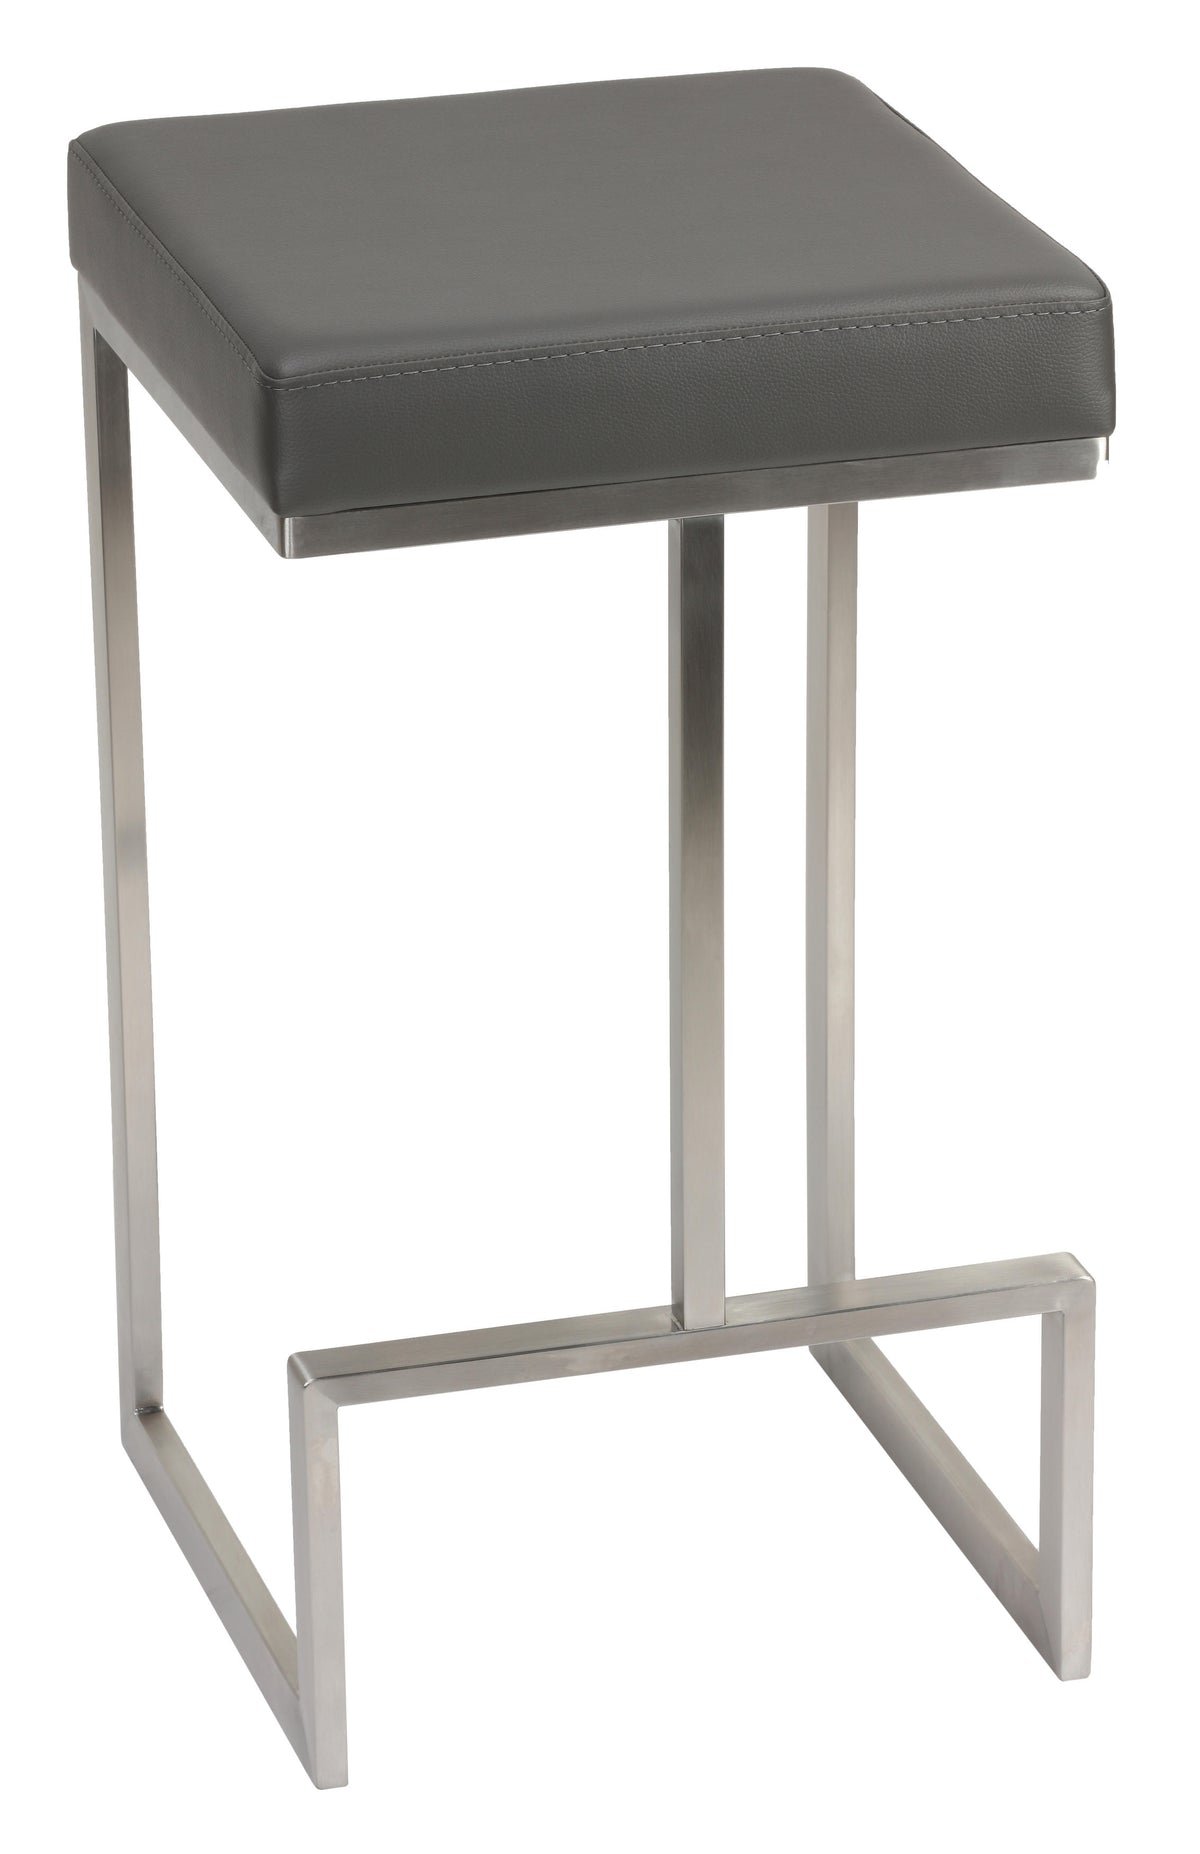 Cortesi Home Ares Counter Height Stools in Brushed Stainless Steel, Set of 2, Grey